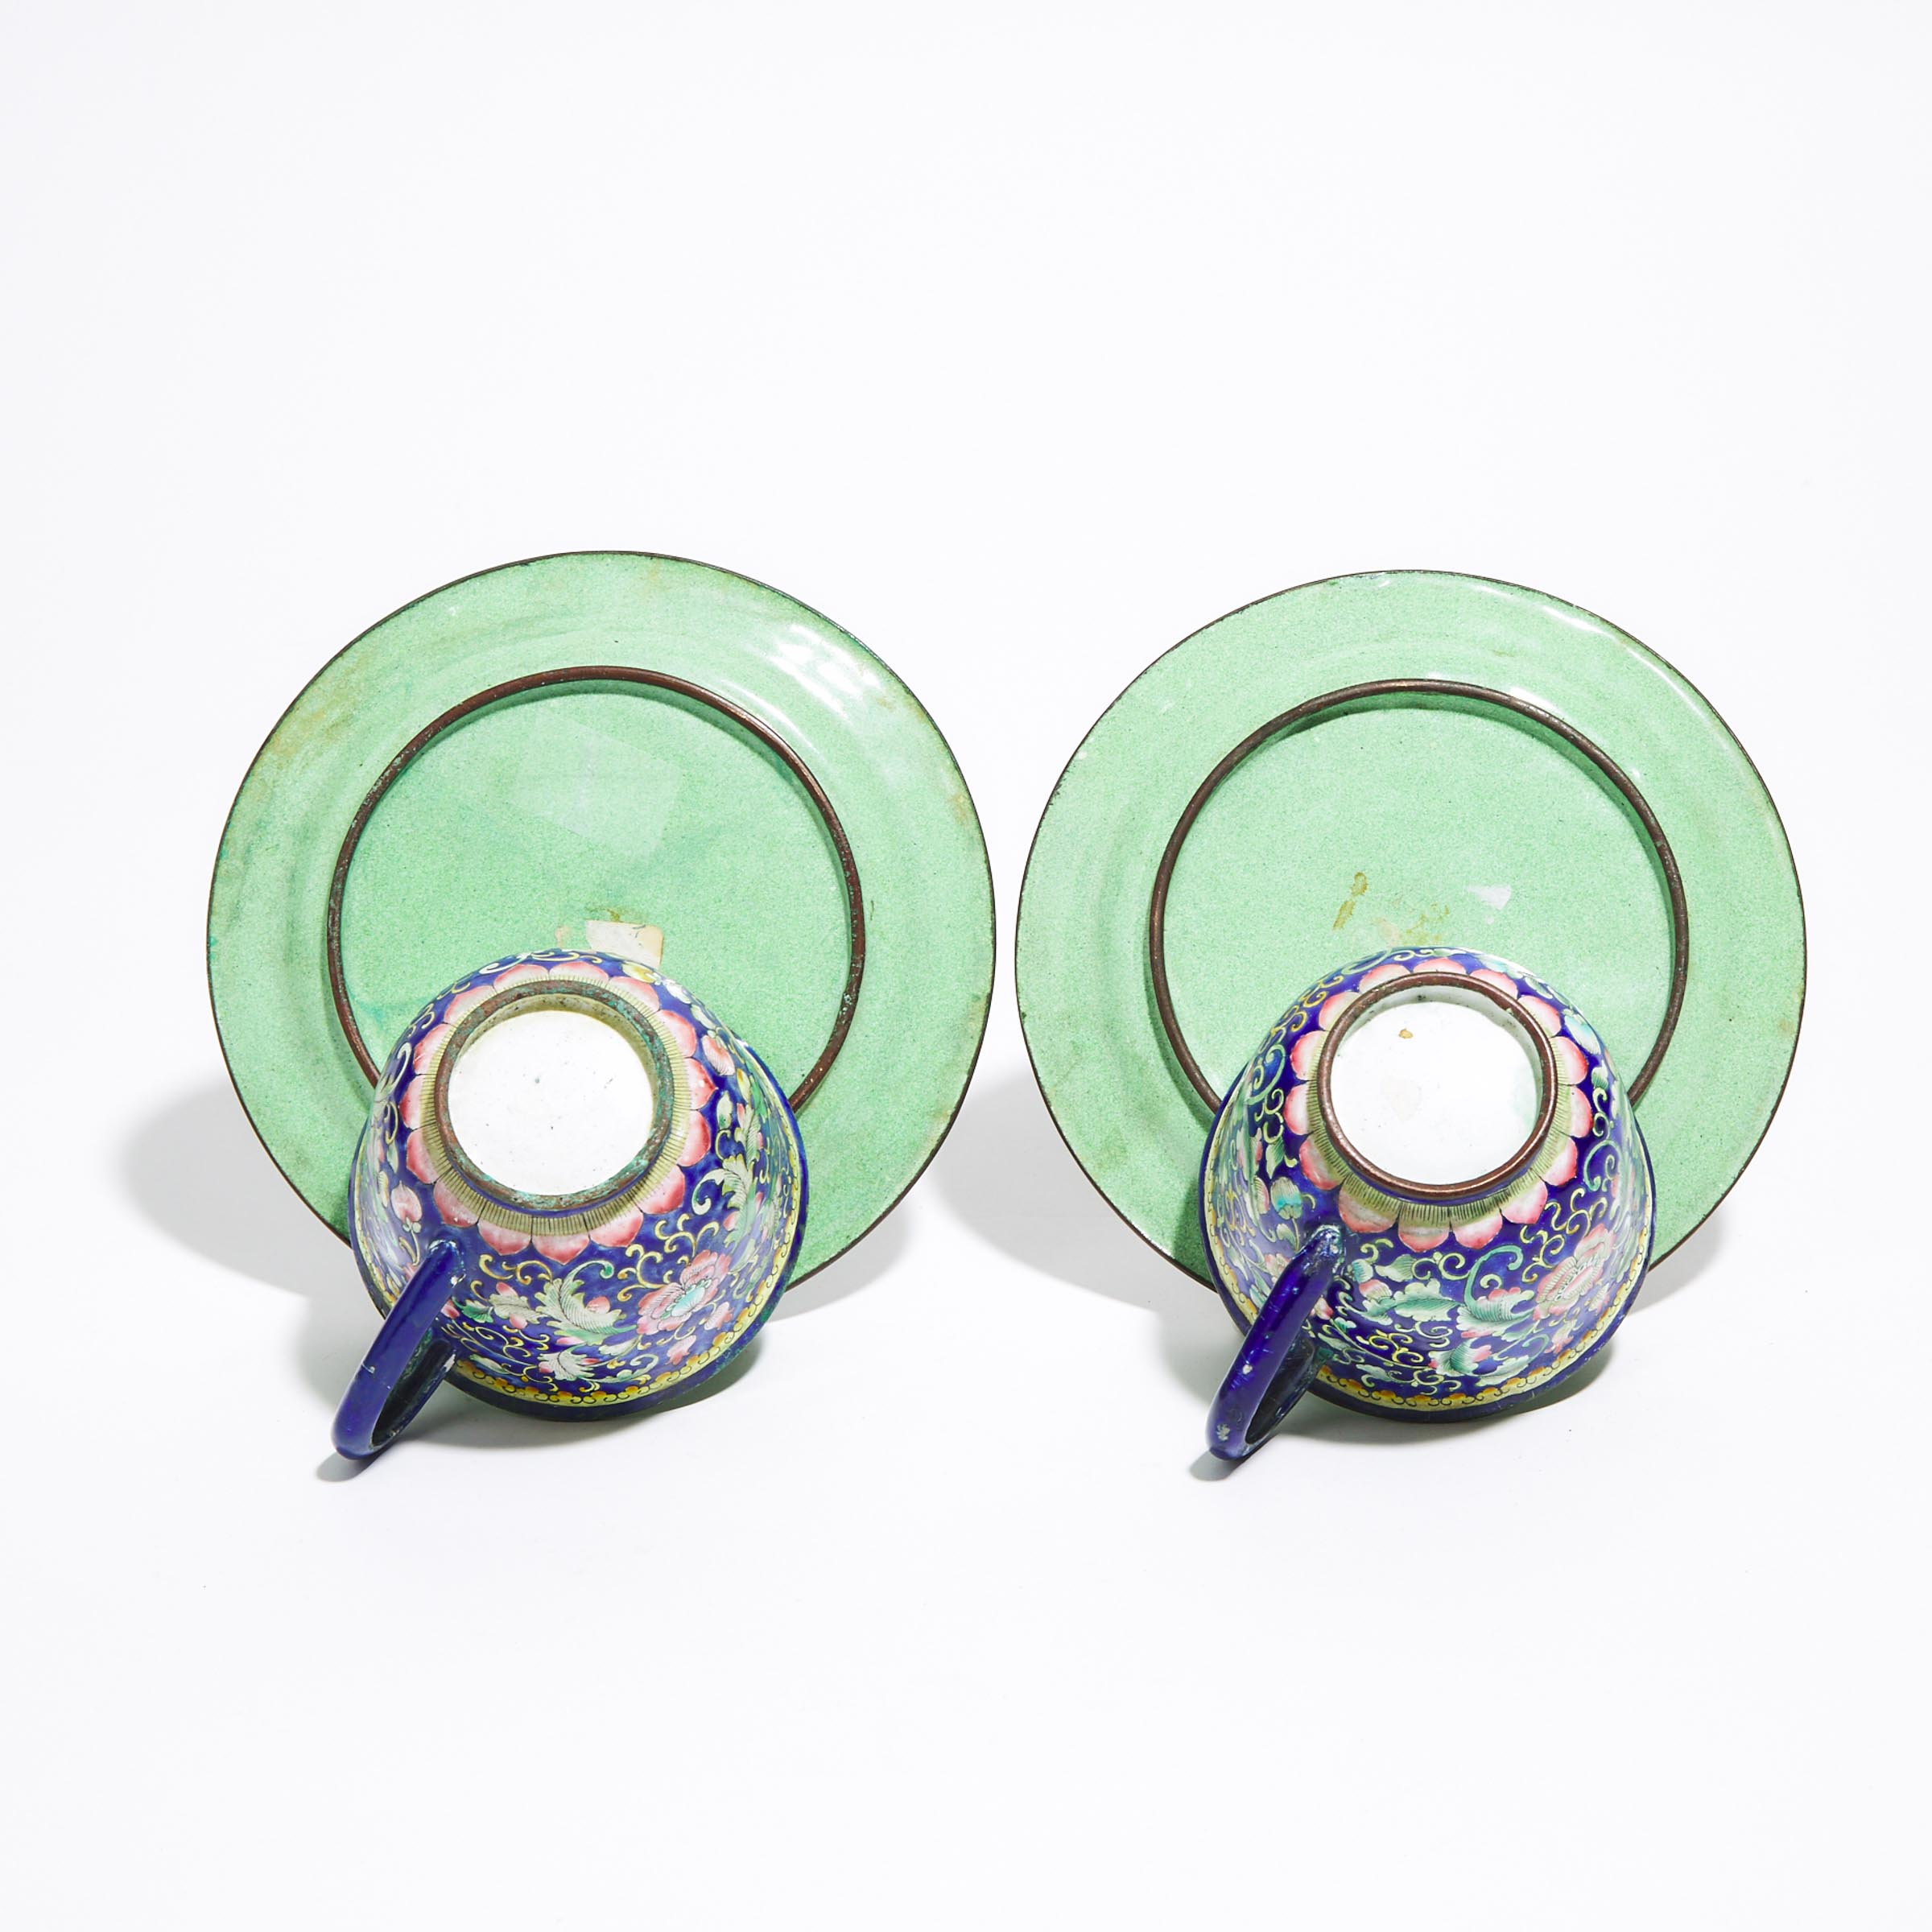 A Pair of Canton Enamel Cups and Saucers, 19th Century